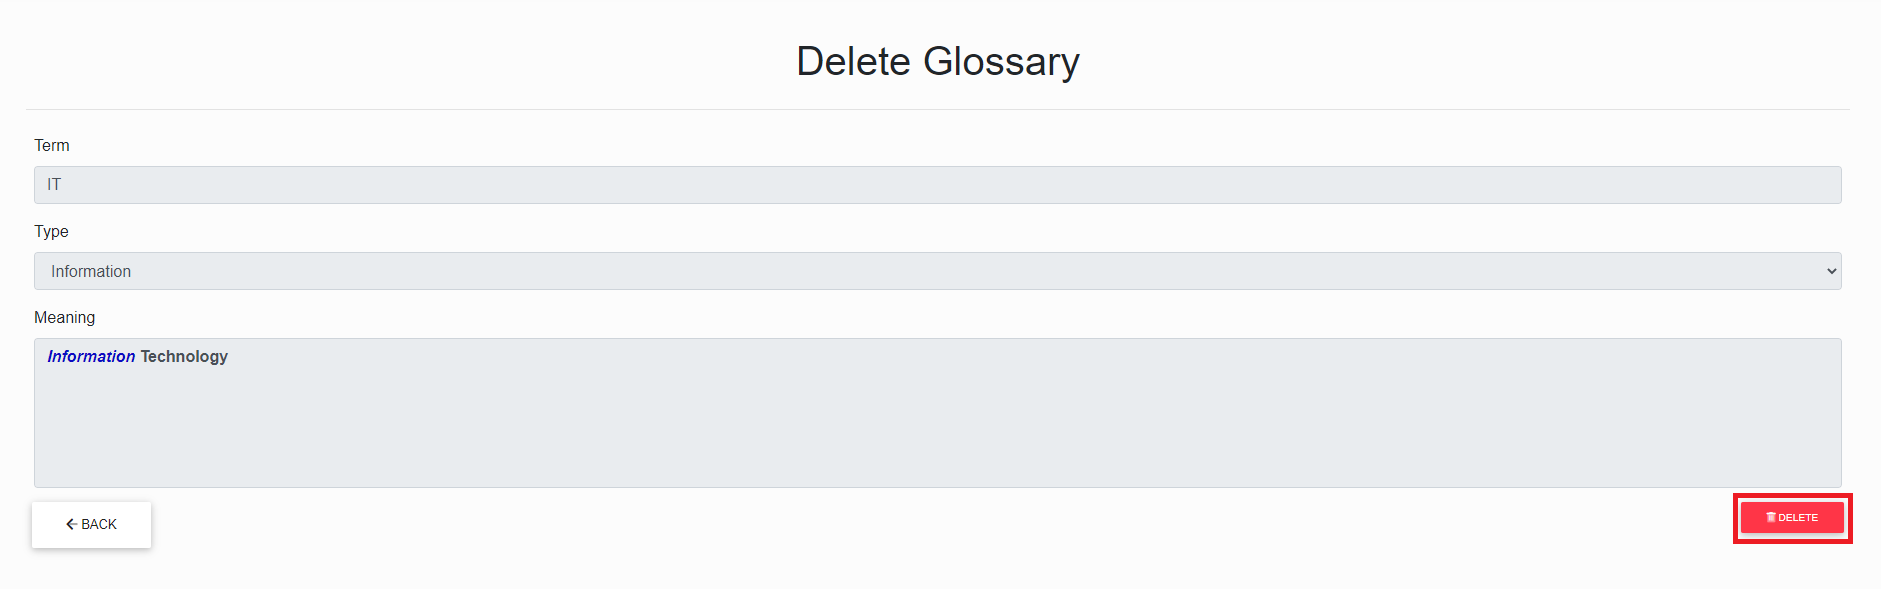 delete glossary 1.png